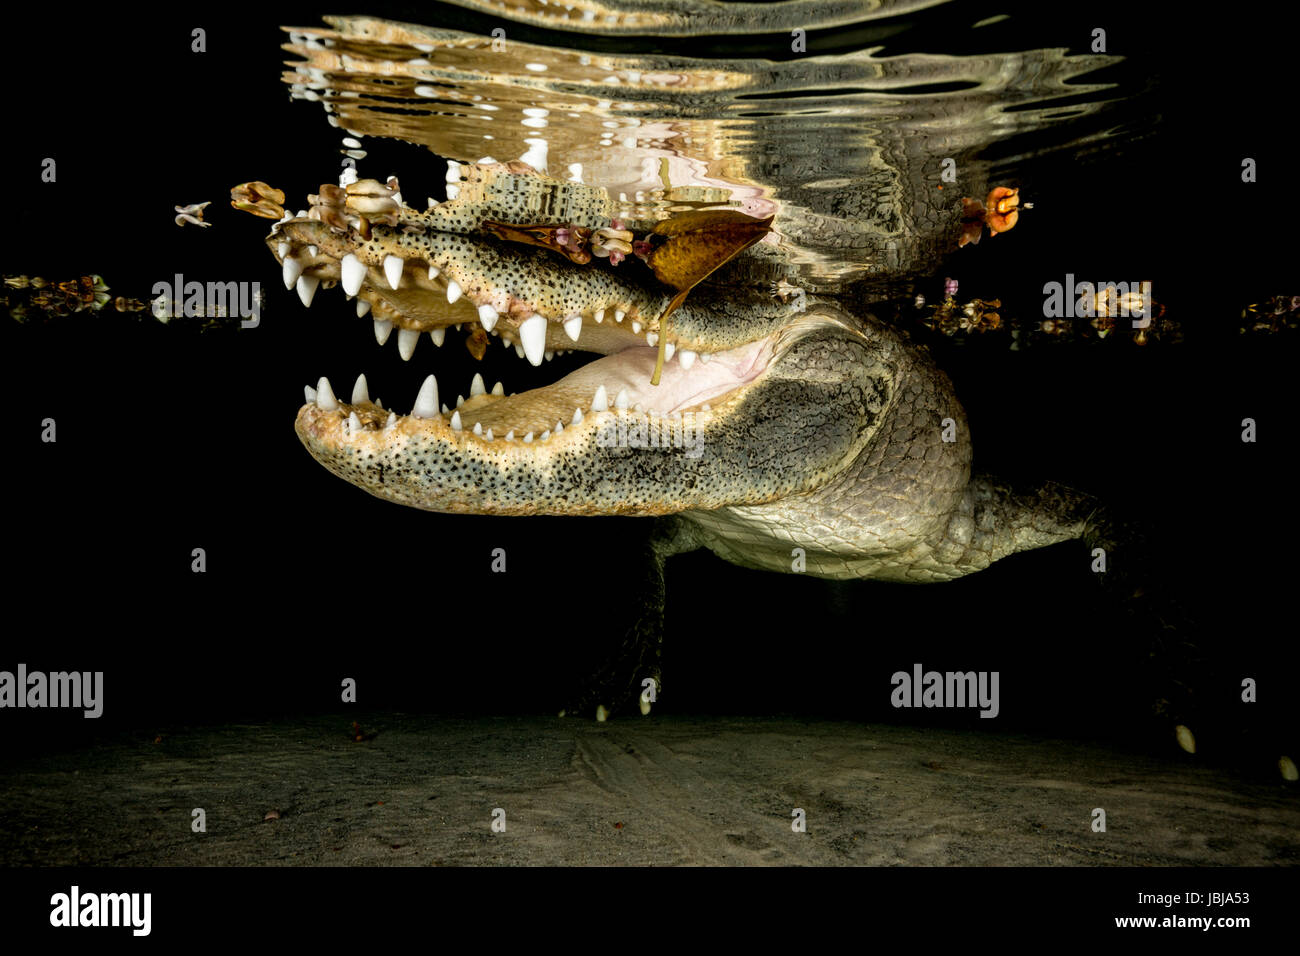 american alligator with its mouth open just under the surface in shallow water, you can see its reflection on the underside of waters surface Stock Photo